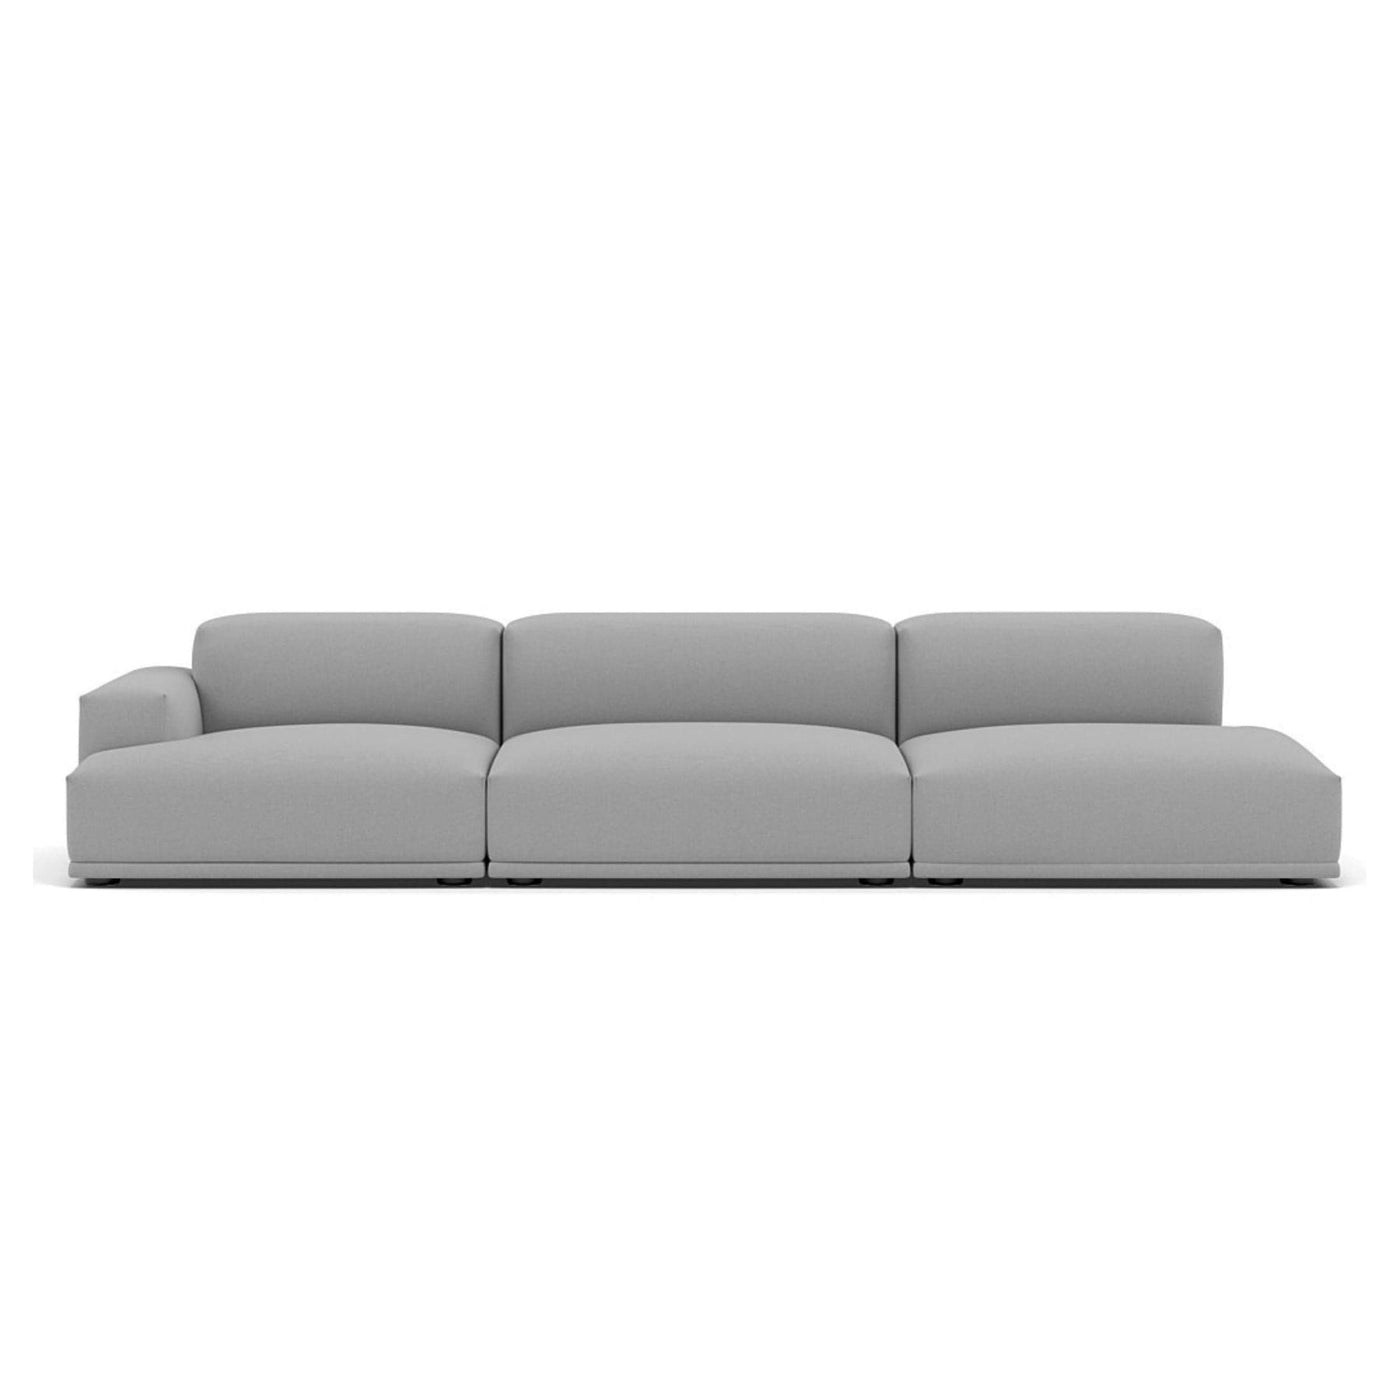 Muuto Connect modular sofa 3 seater in configuration 2. Made to order from someday designs. #colour_steelcut-trio-133